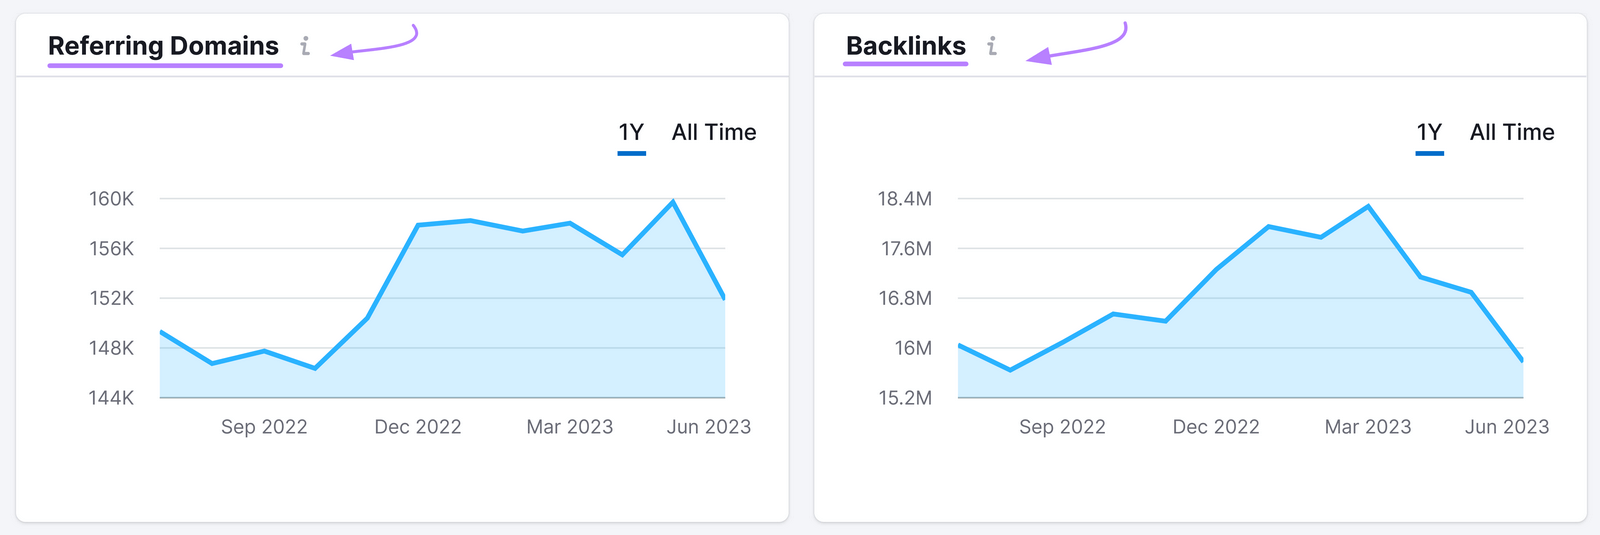 "referring domains" and "backlinks" metrics shown in graph